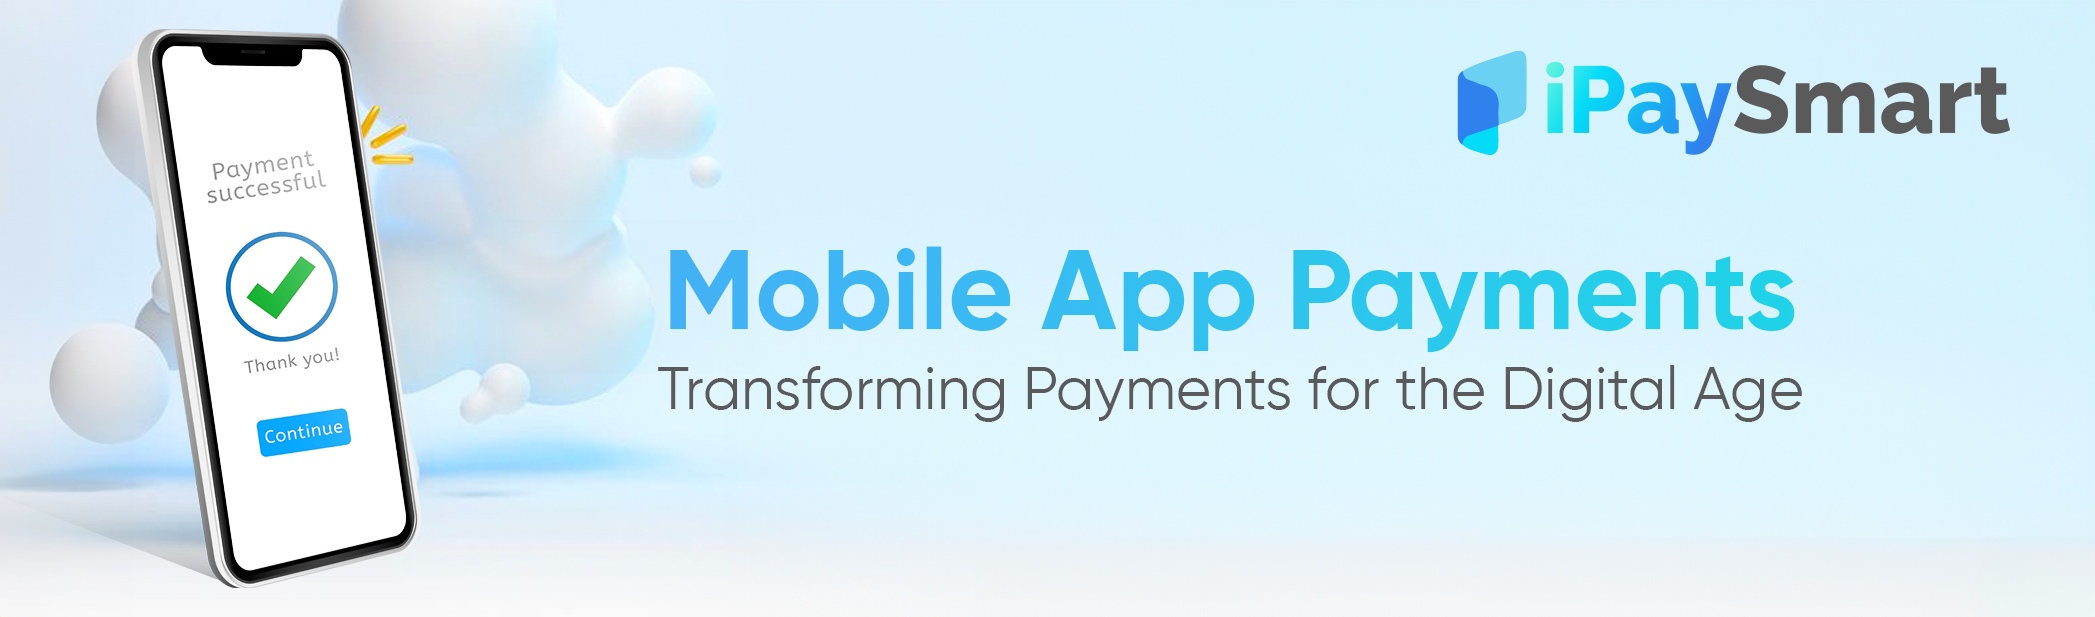 Mobile App Payments: Transforming Payments for the Digital Age